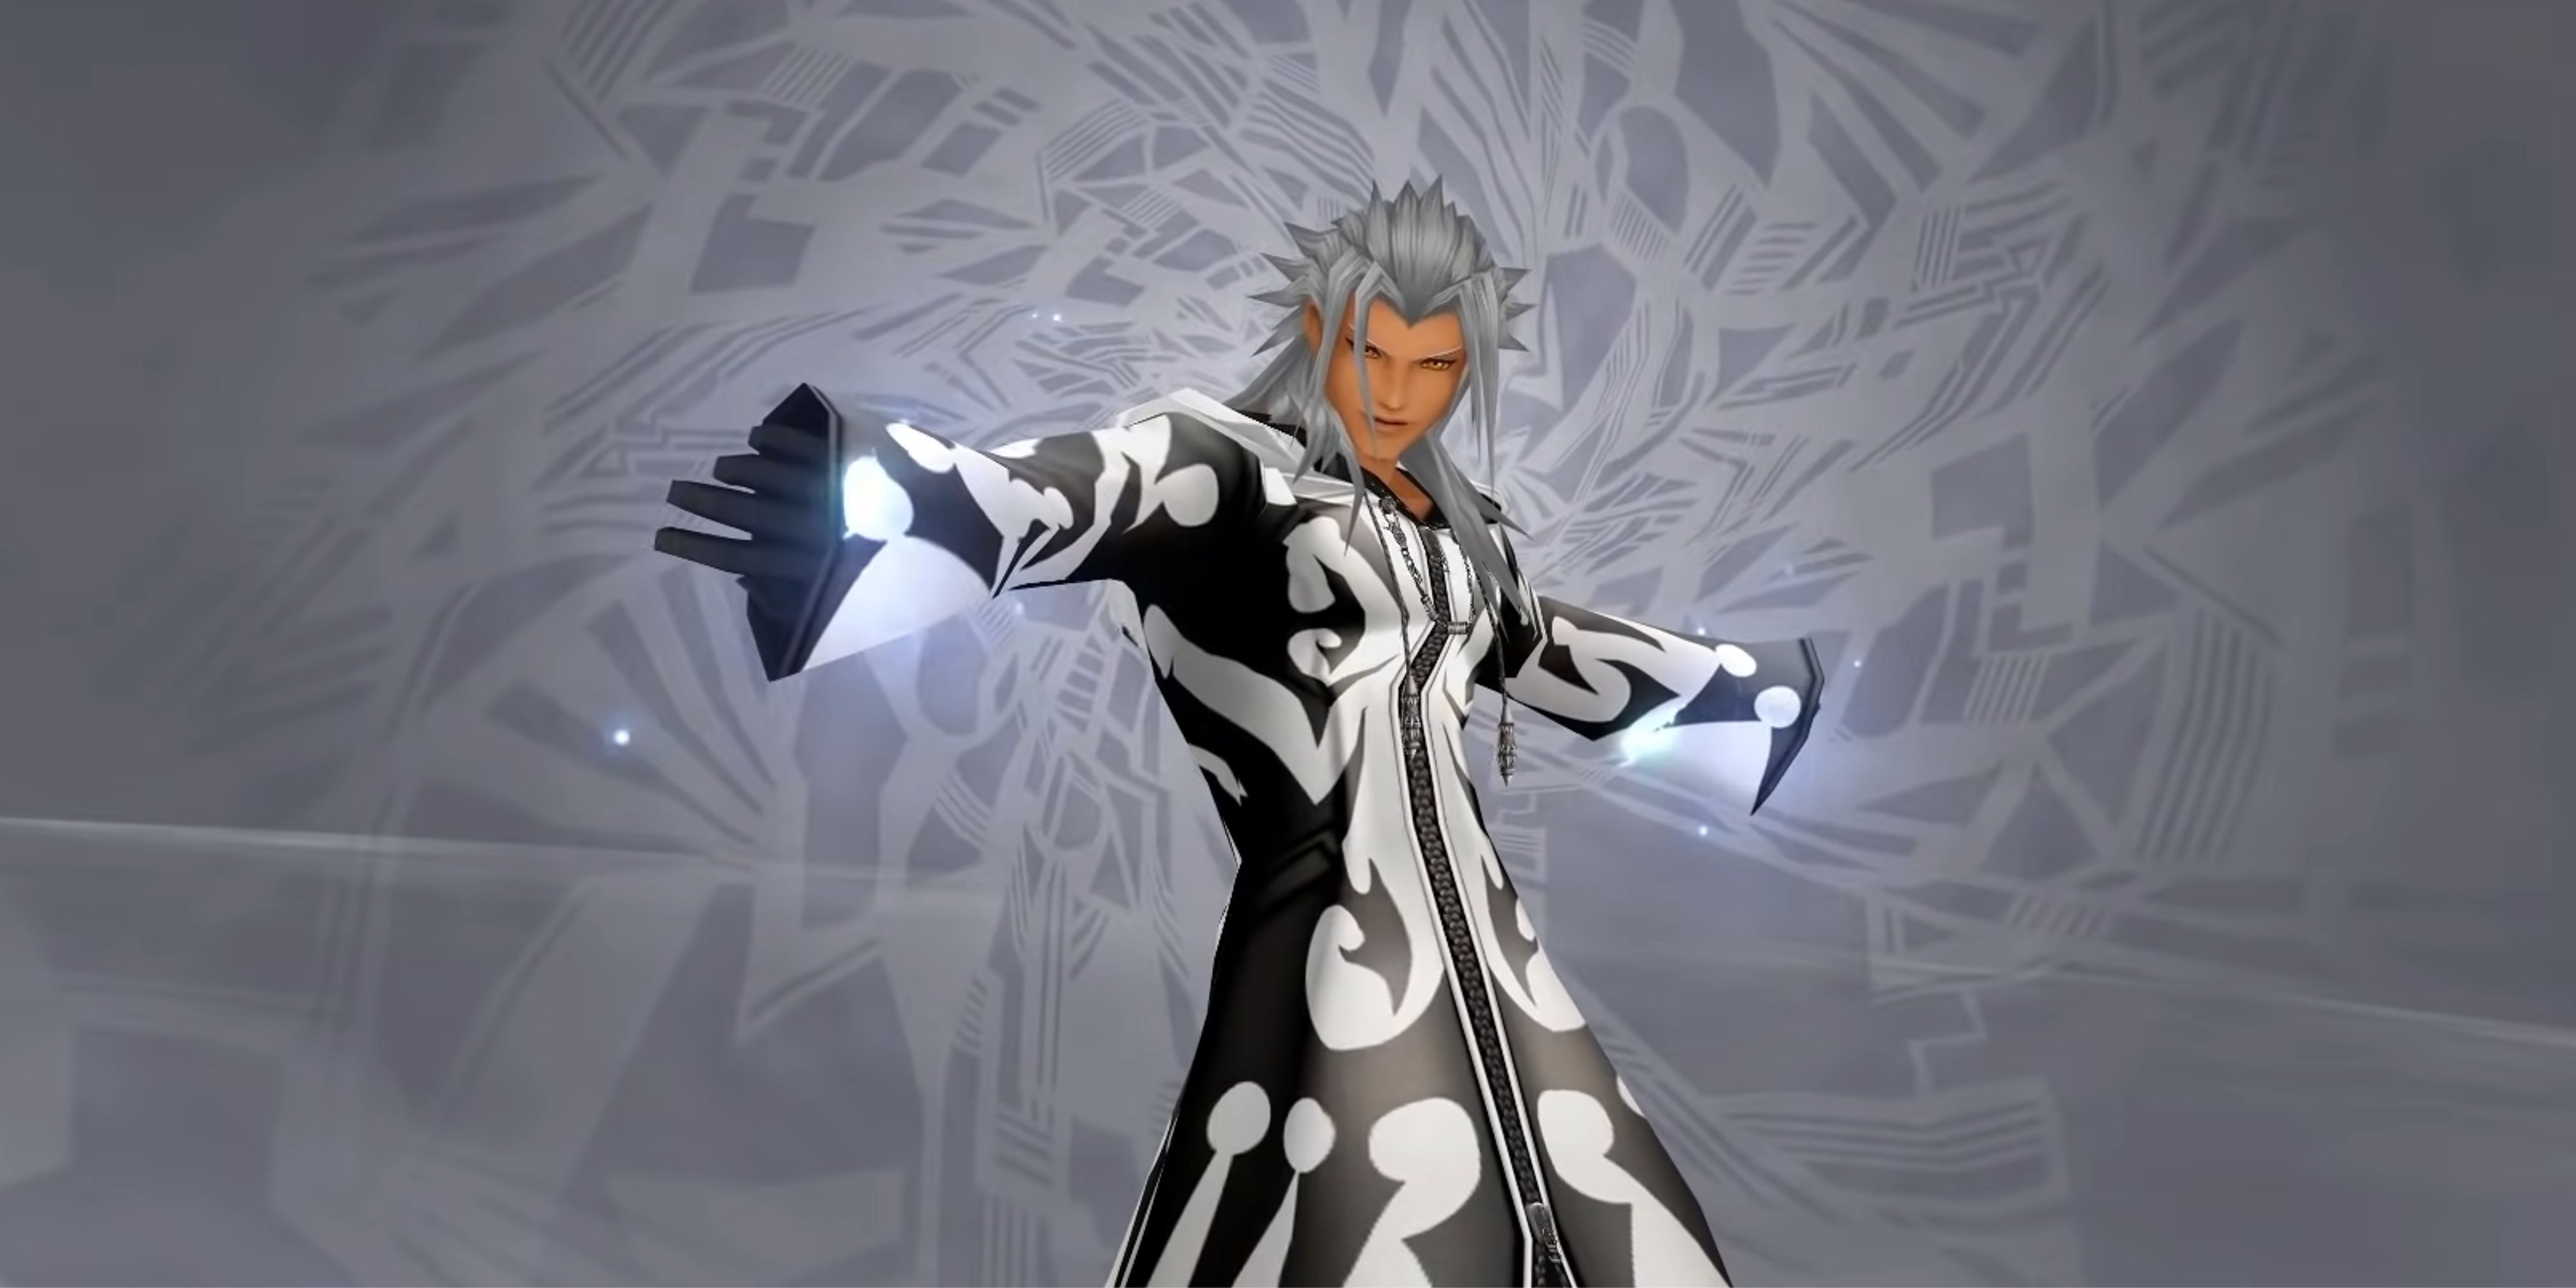 Xemnas faces Sora and Riku in his final form.